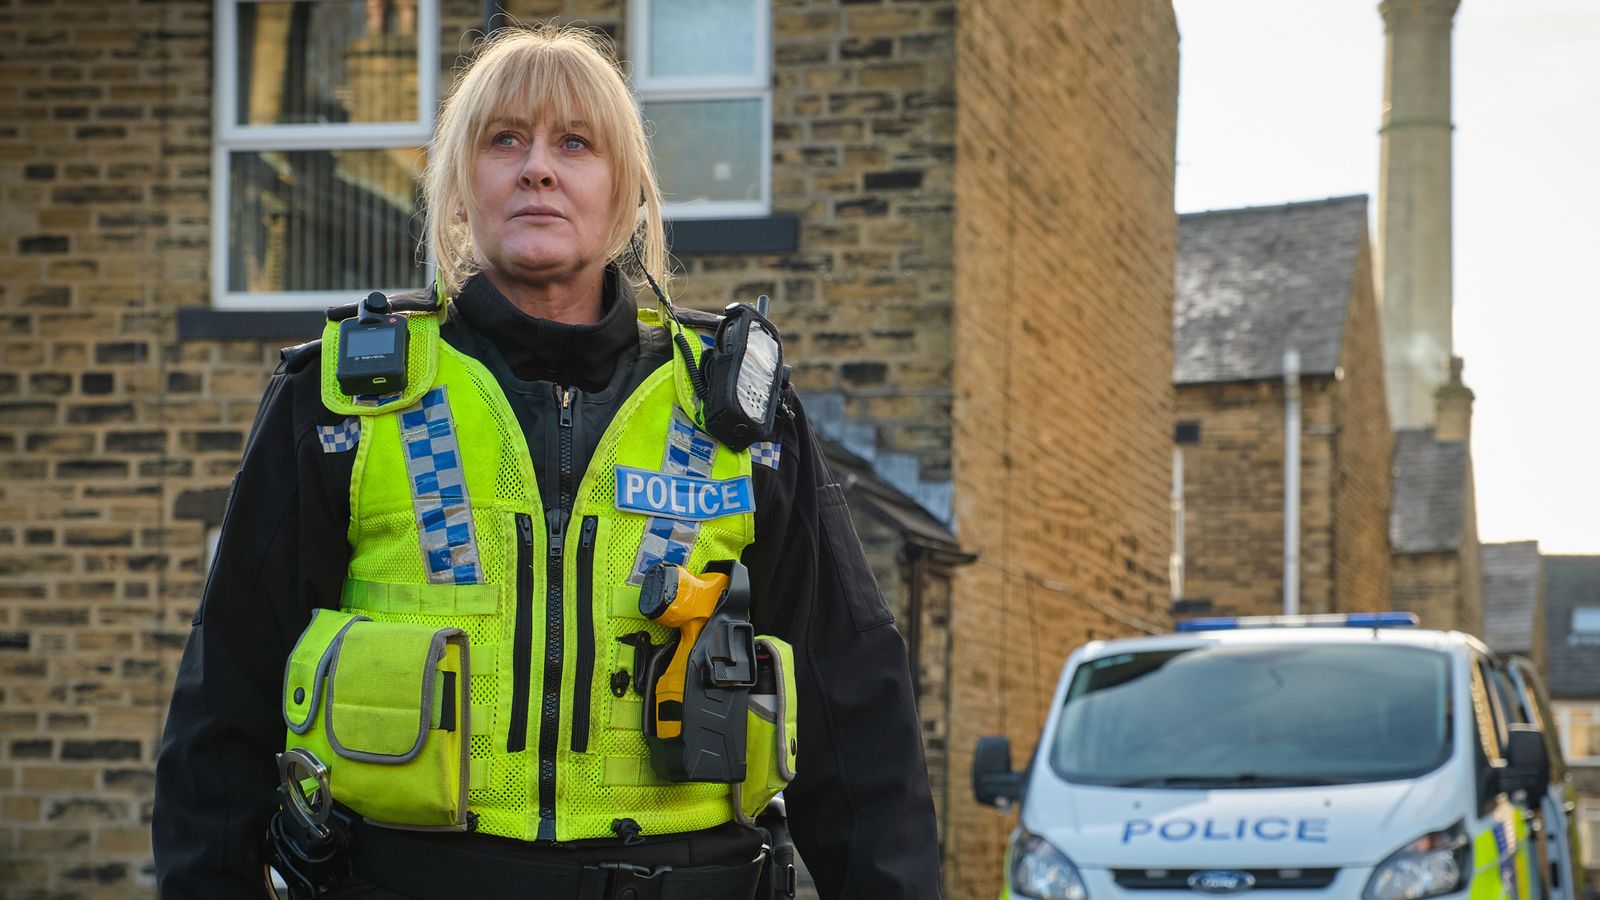 BAFTA TV Awards: Happy Valley, Succession and Top Boy among shows in the running at ceremony today